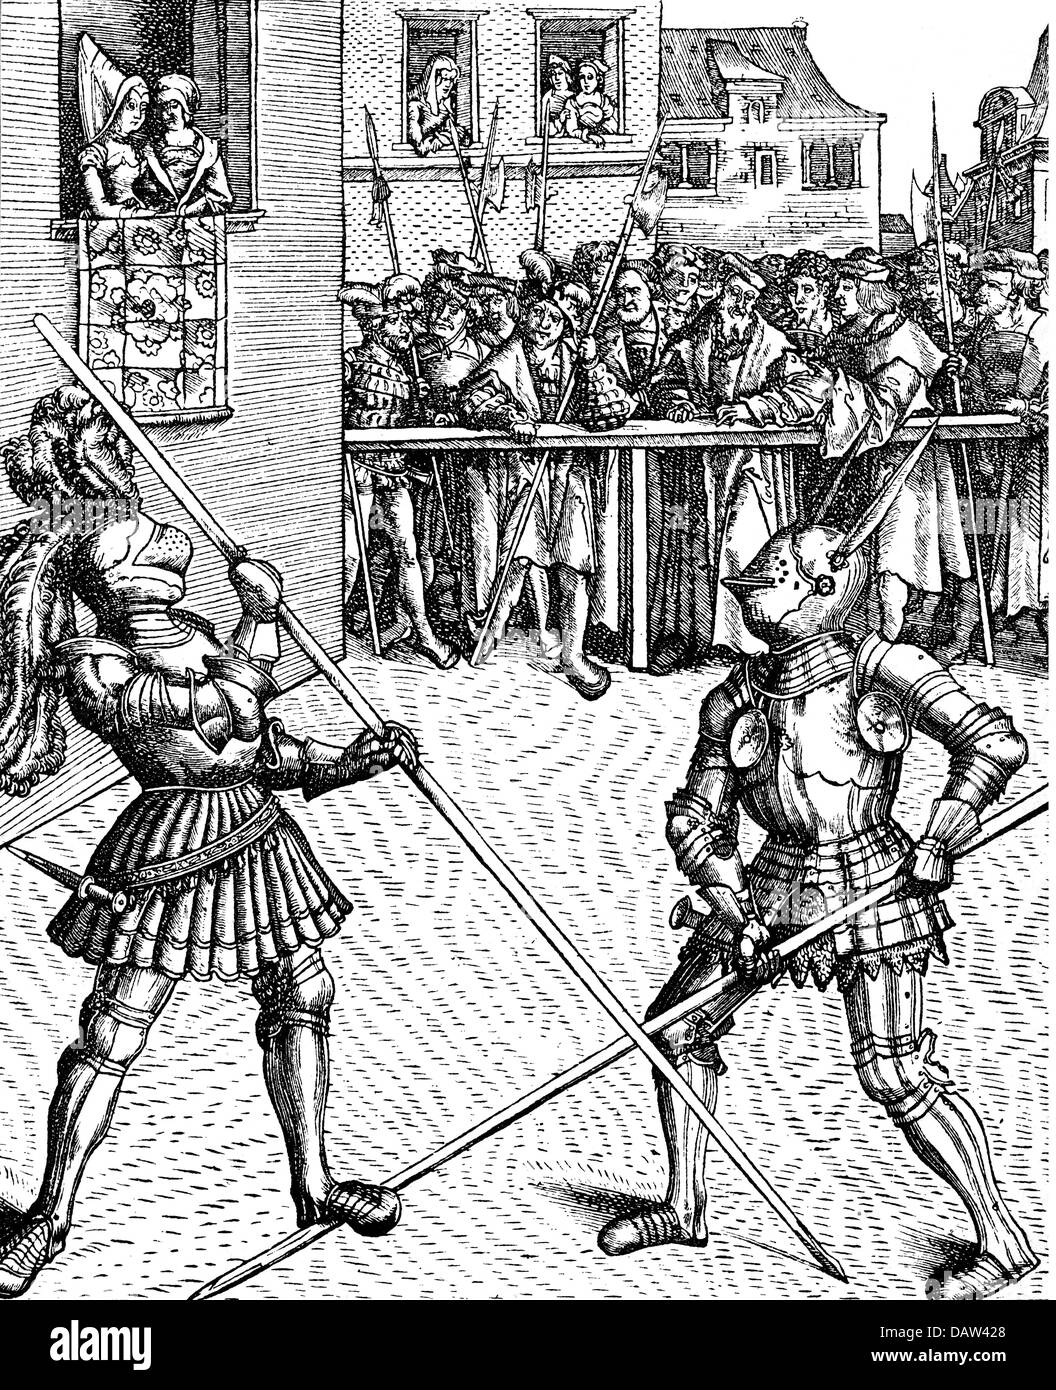 Middle Ages, knights, tournament, knights fighting on foot with lances, woodcut from 'Weisskunig', by Hans Burgkmair, 1516, Additional-Rights-Clearences-Not Available Stock Photo